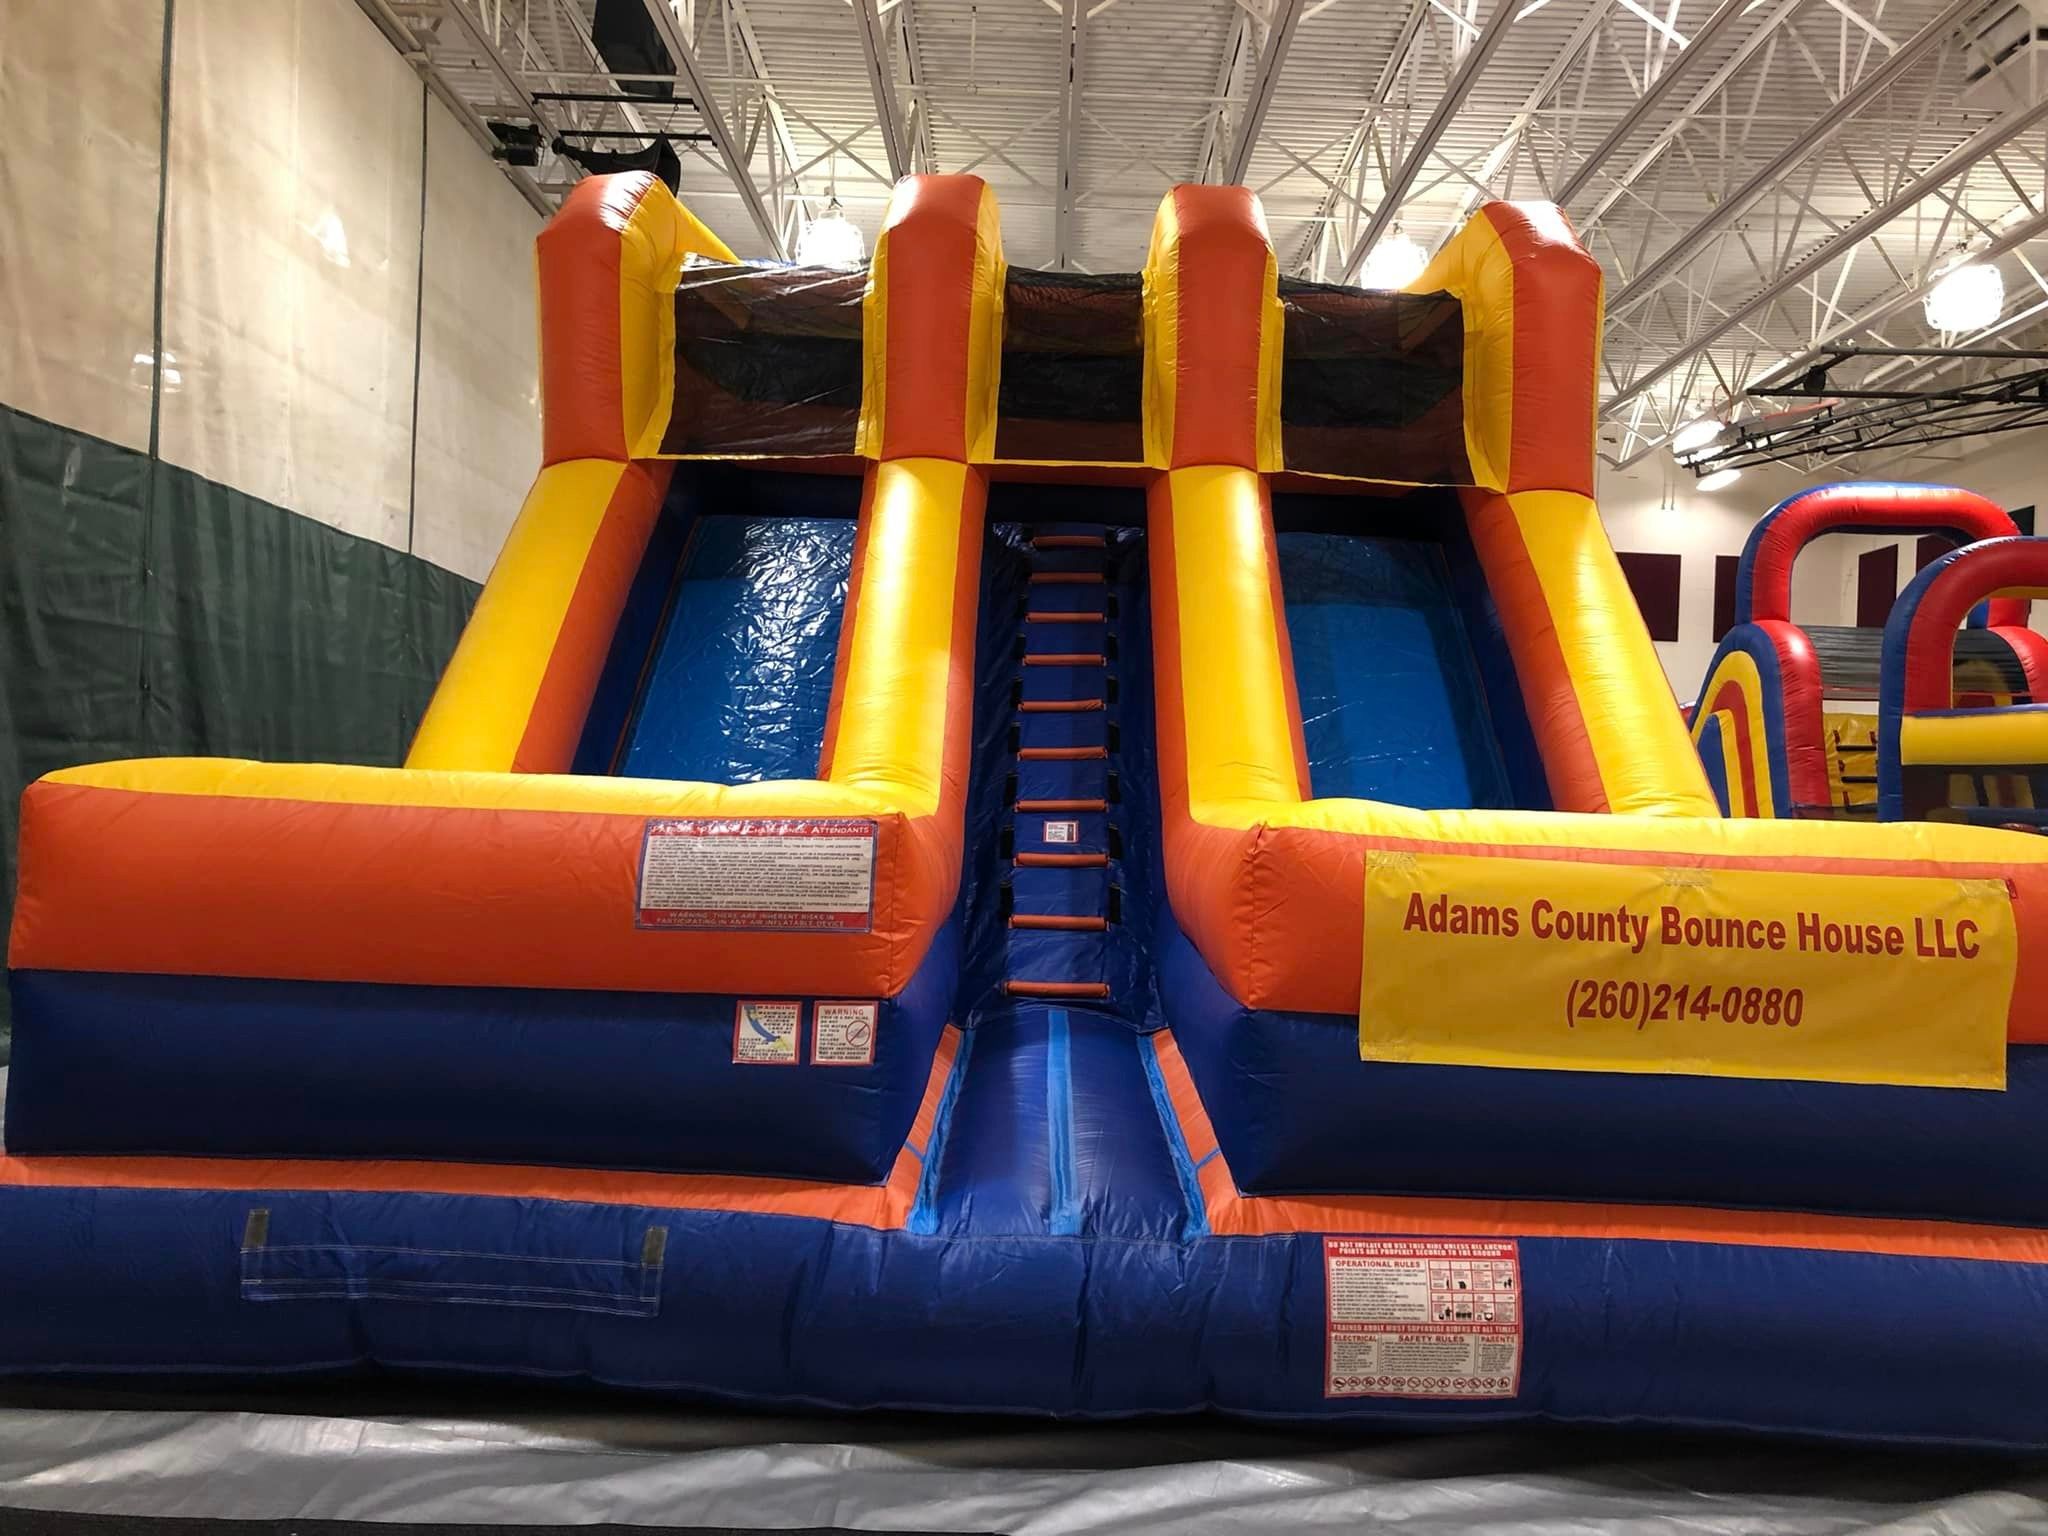 Bouncy Houses  for Adams County Bounce Houses, LLC in Decatur, IN